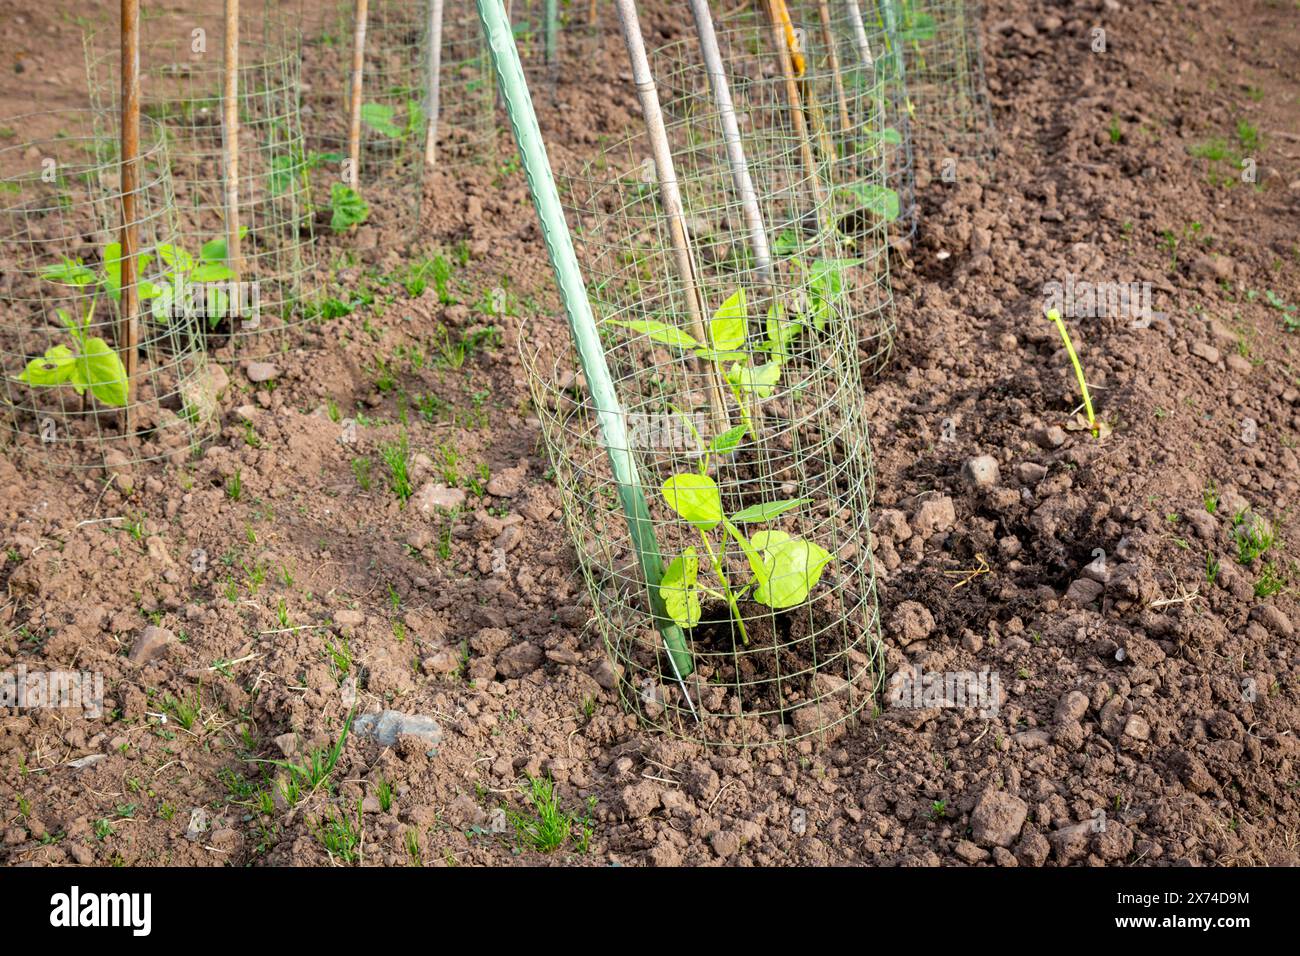 Smallholding garden with runner beans plants growing up poles and nets, UK Stock Photo